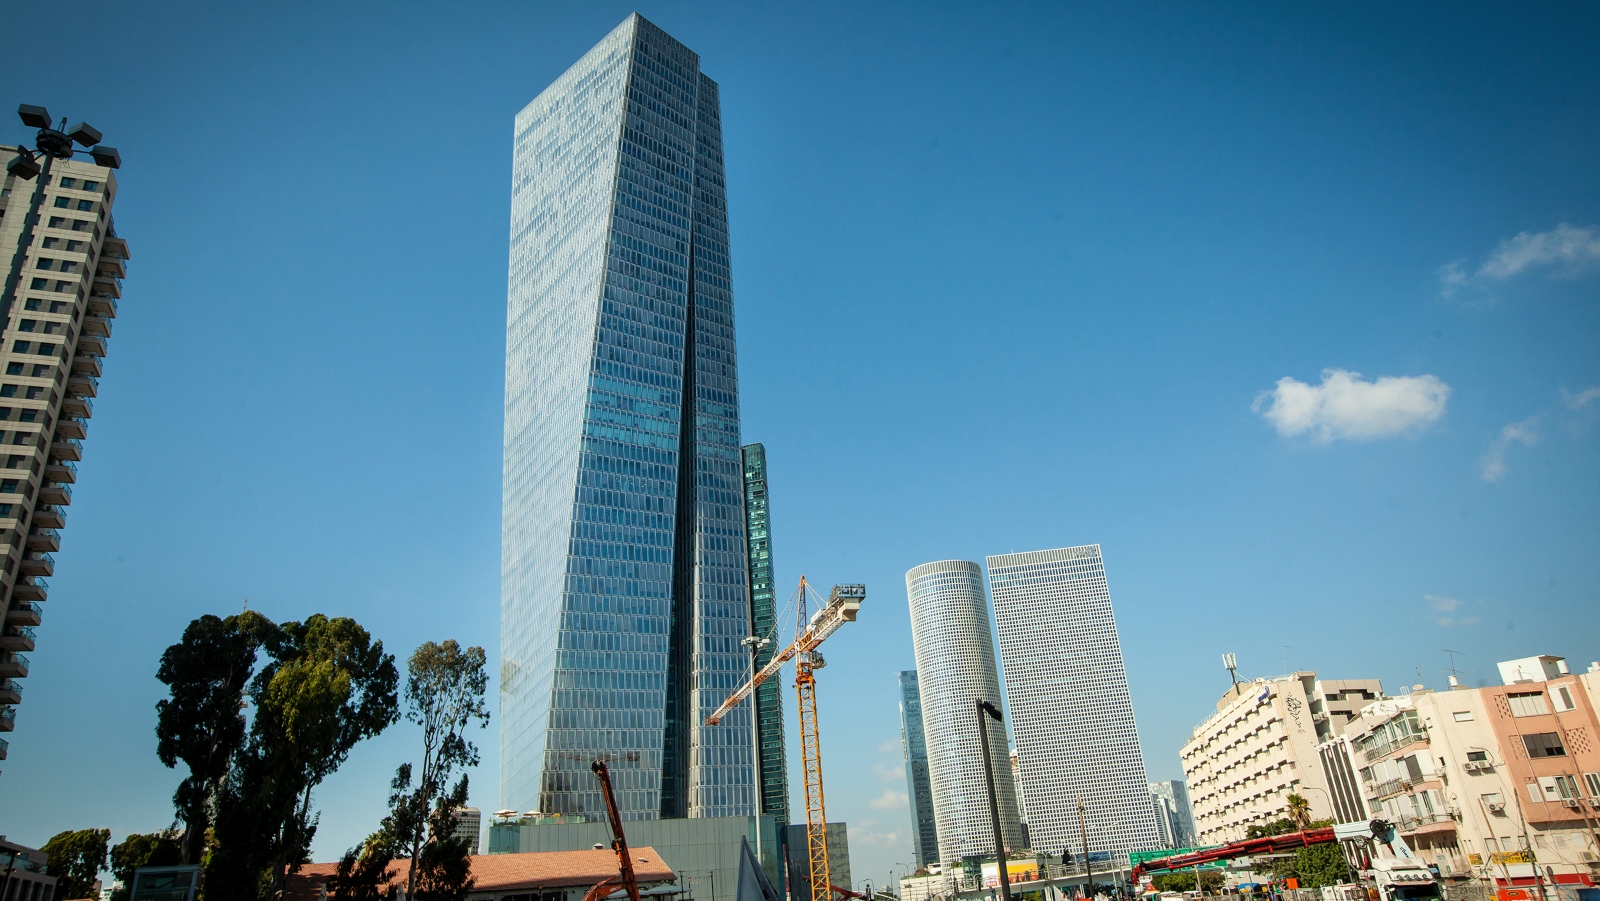 Office buildings in central Tel Aviv, August 2019. Photo by Moshe Shai/Flash90